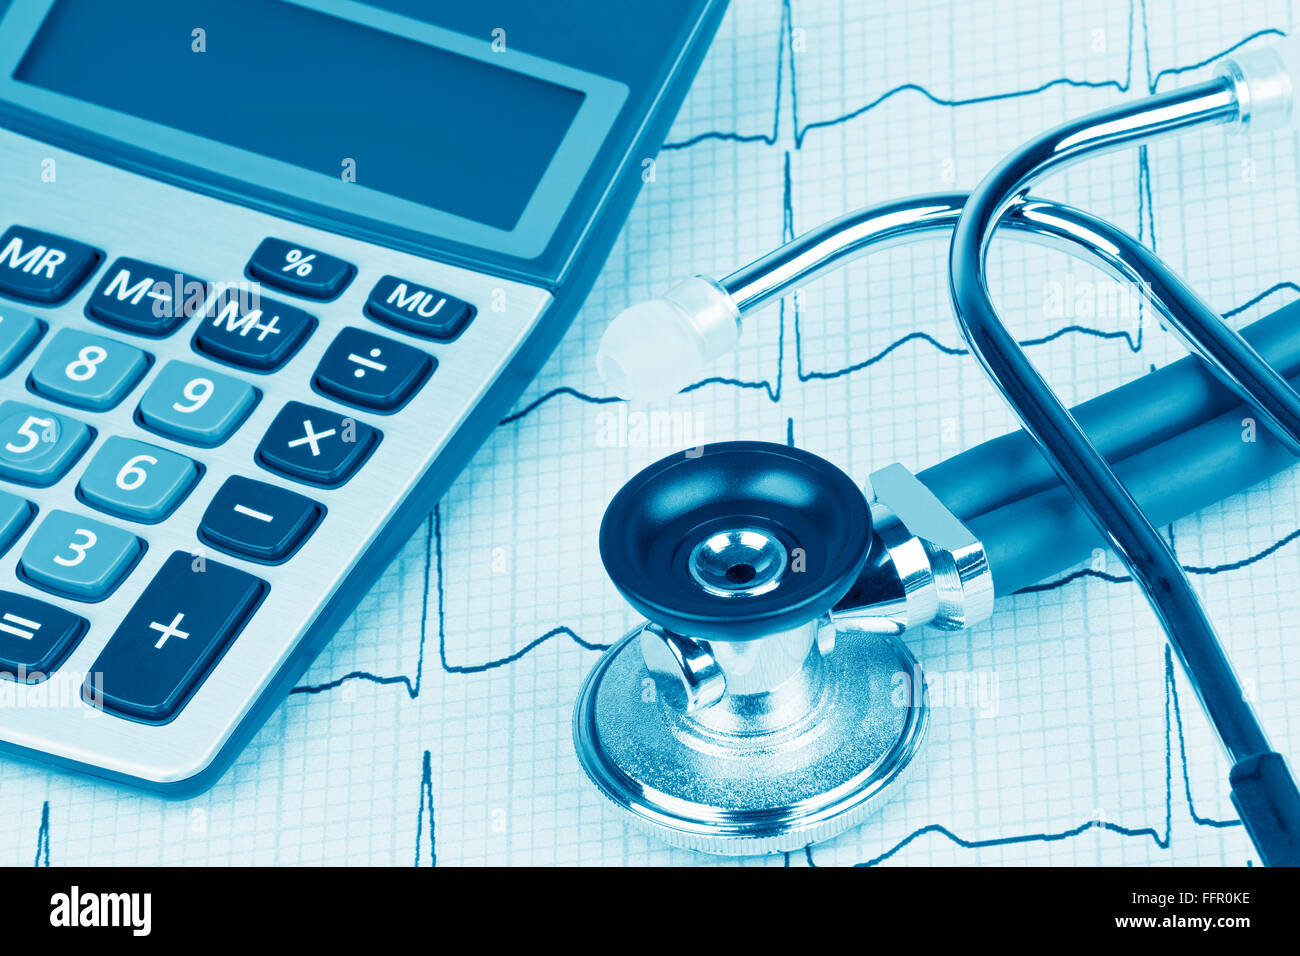 Electrocardiograph also known as a EKG or ECG graph with a stethoscope and calculator showing the high cost of heath care Stock Photo